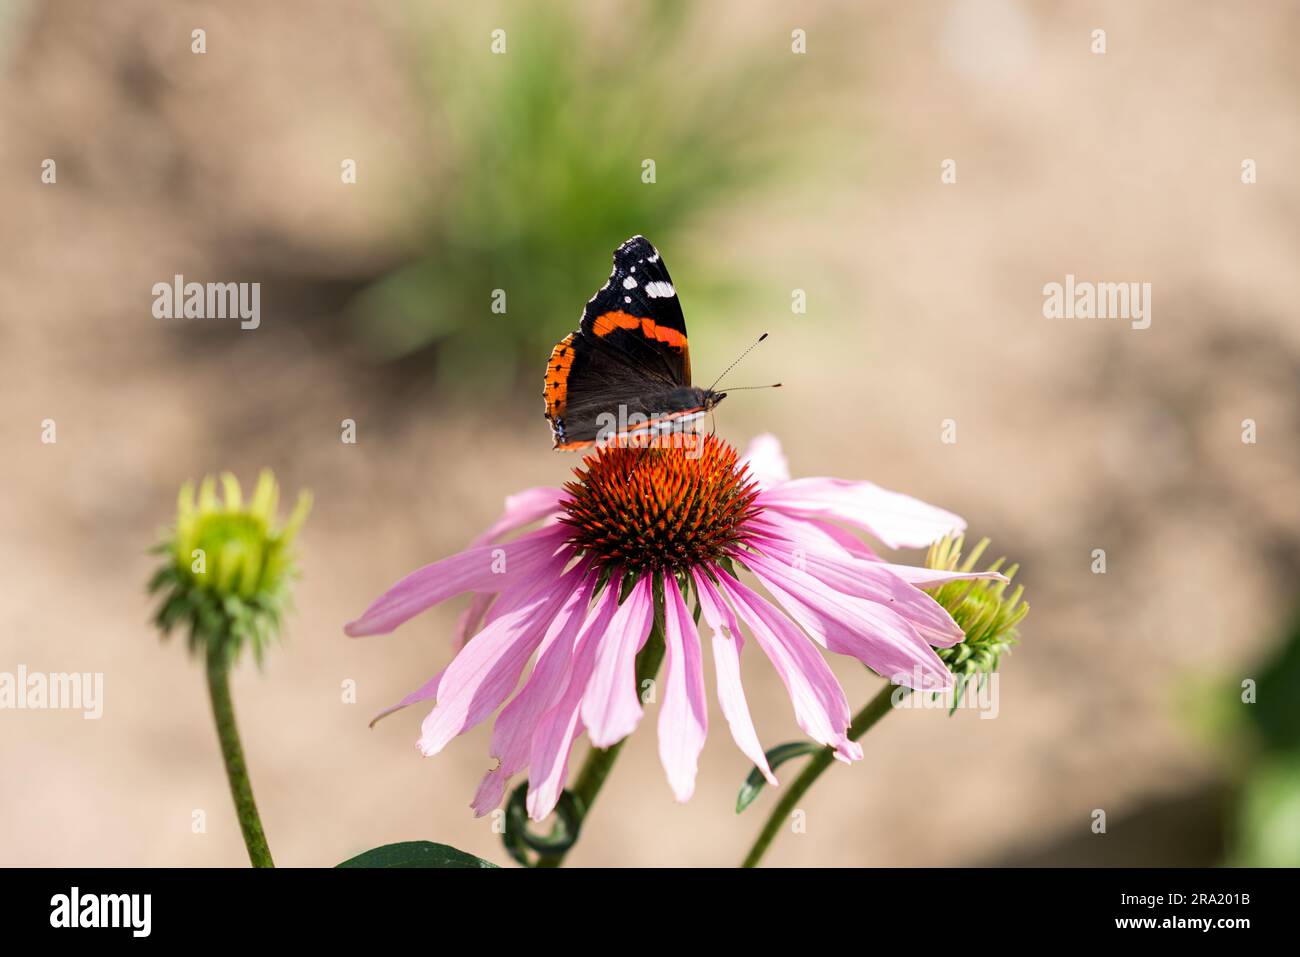 Butterfly on a violet daisy flower on a sunny summer day. Stock Photo